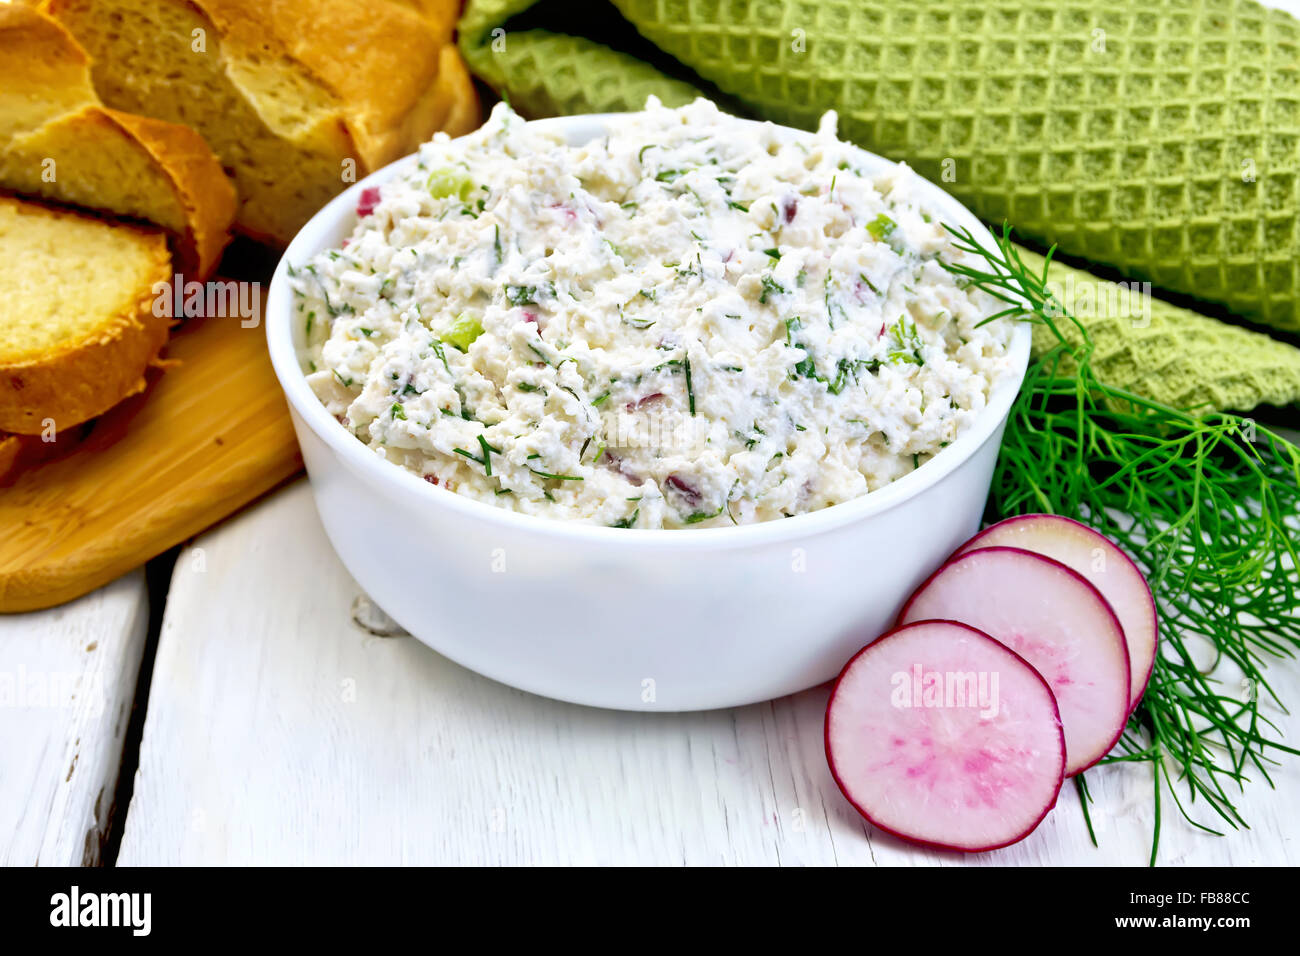 Pate Of Cottage Cheese Dill And Radish In A Bowl Radish Slices